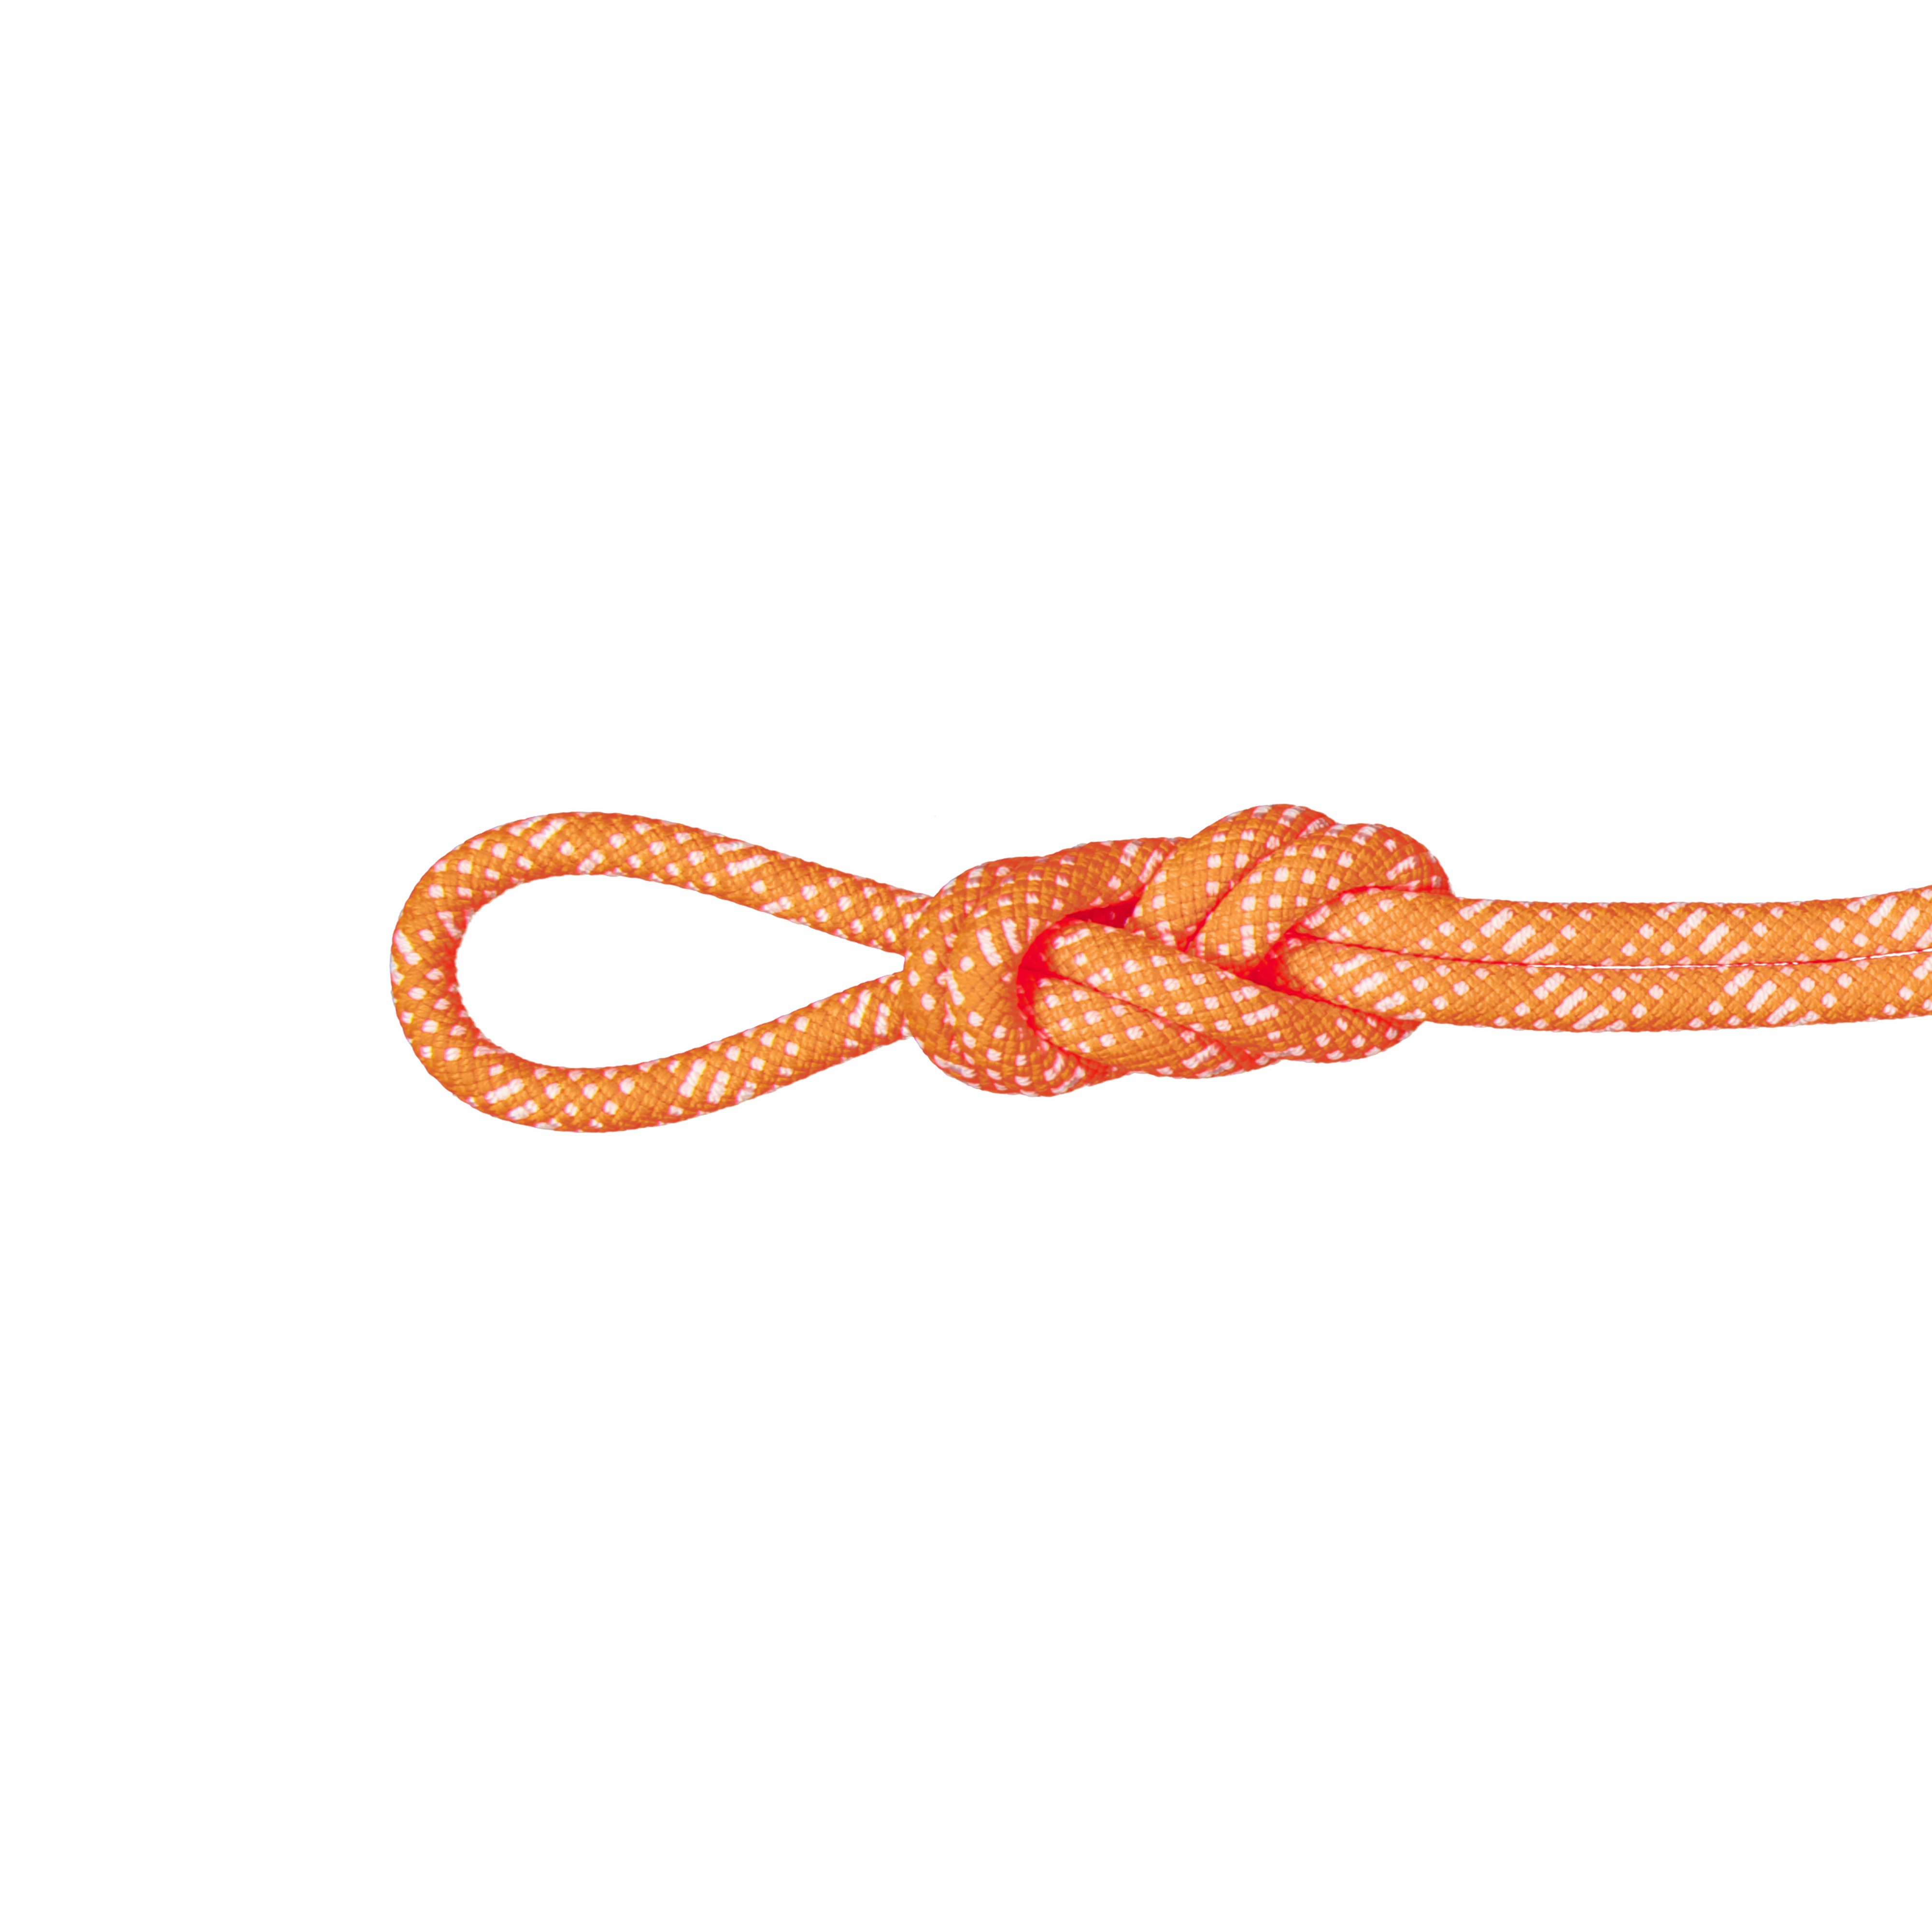 10.1 Gym Station Classic Rope - Classic Standard, safety orange-white, 200 m product image